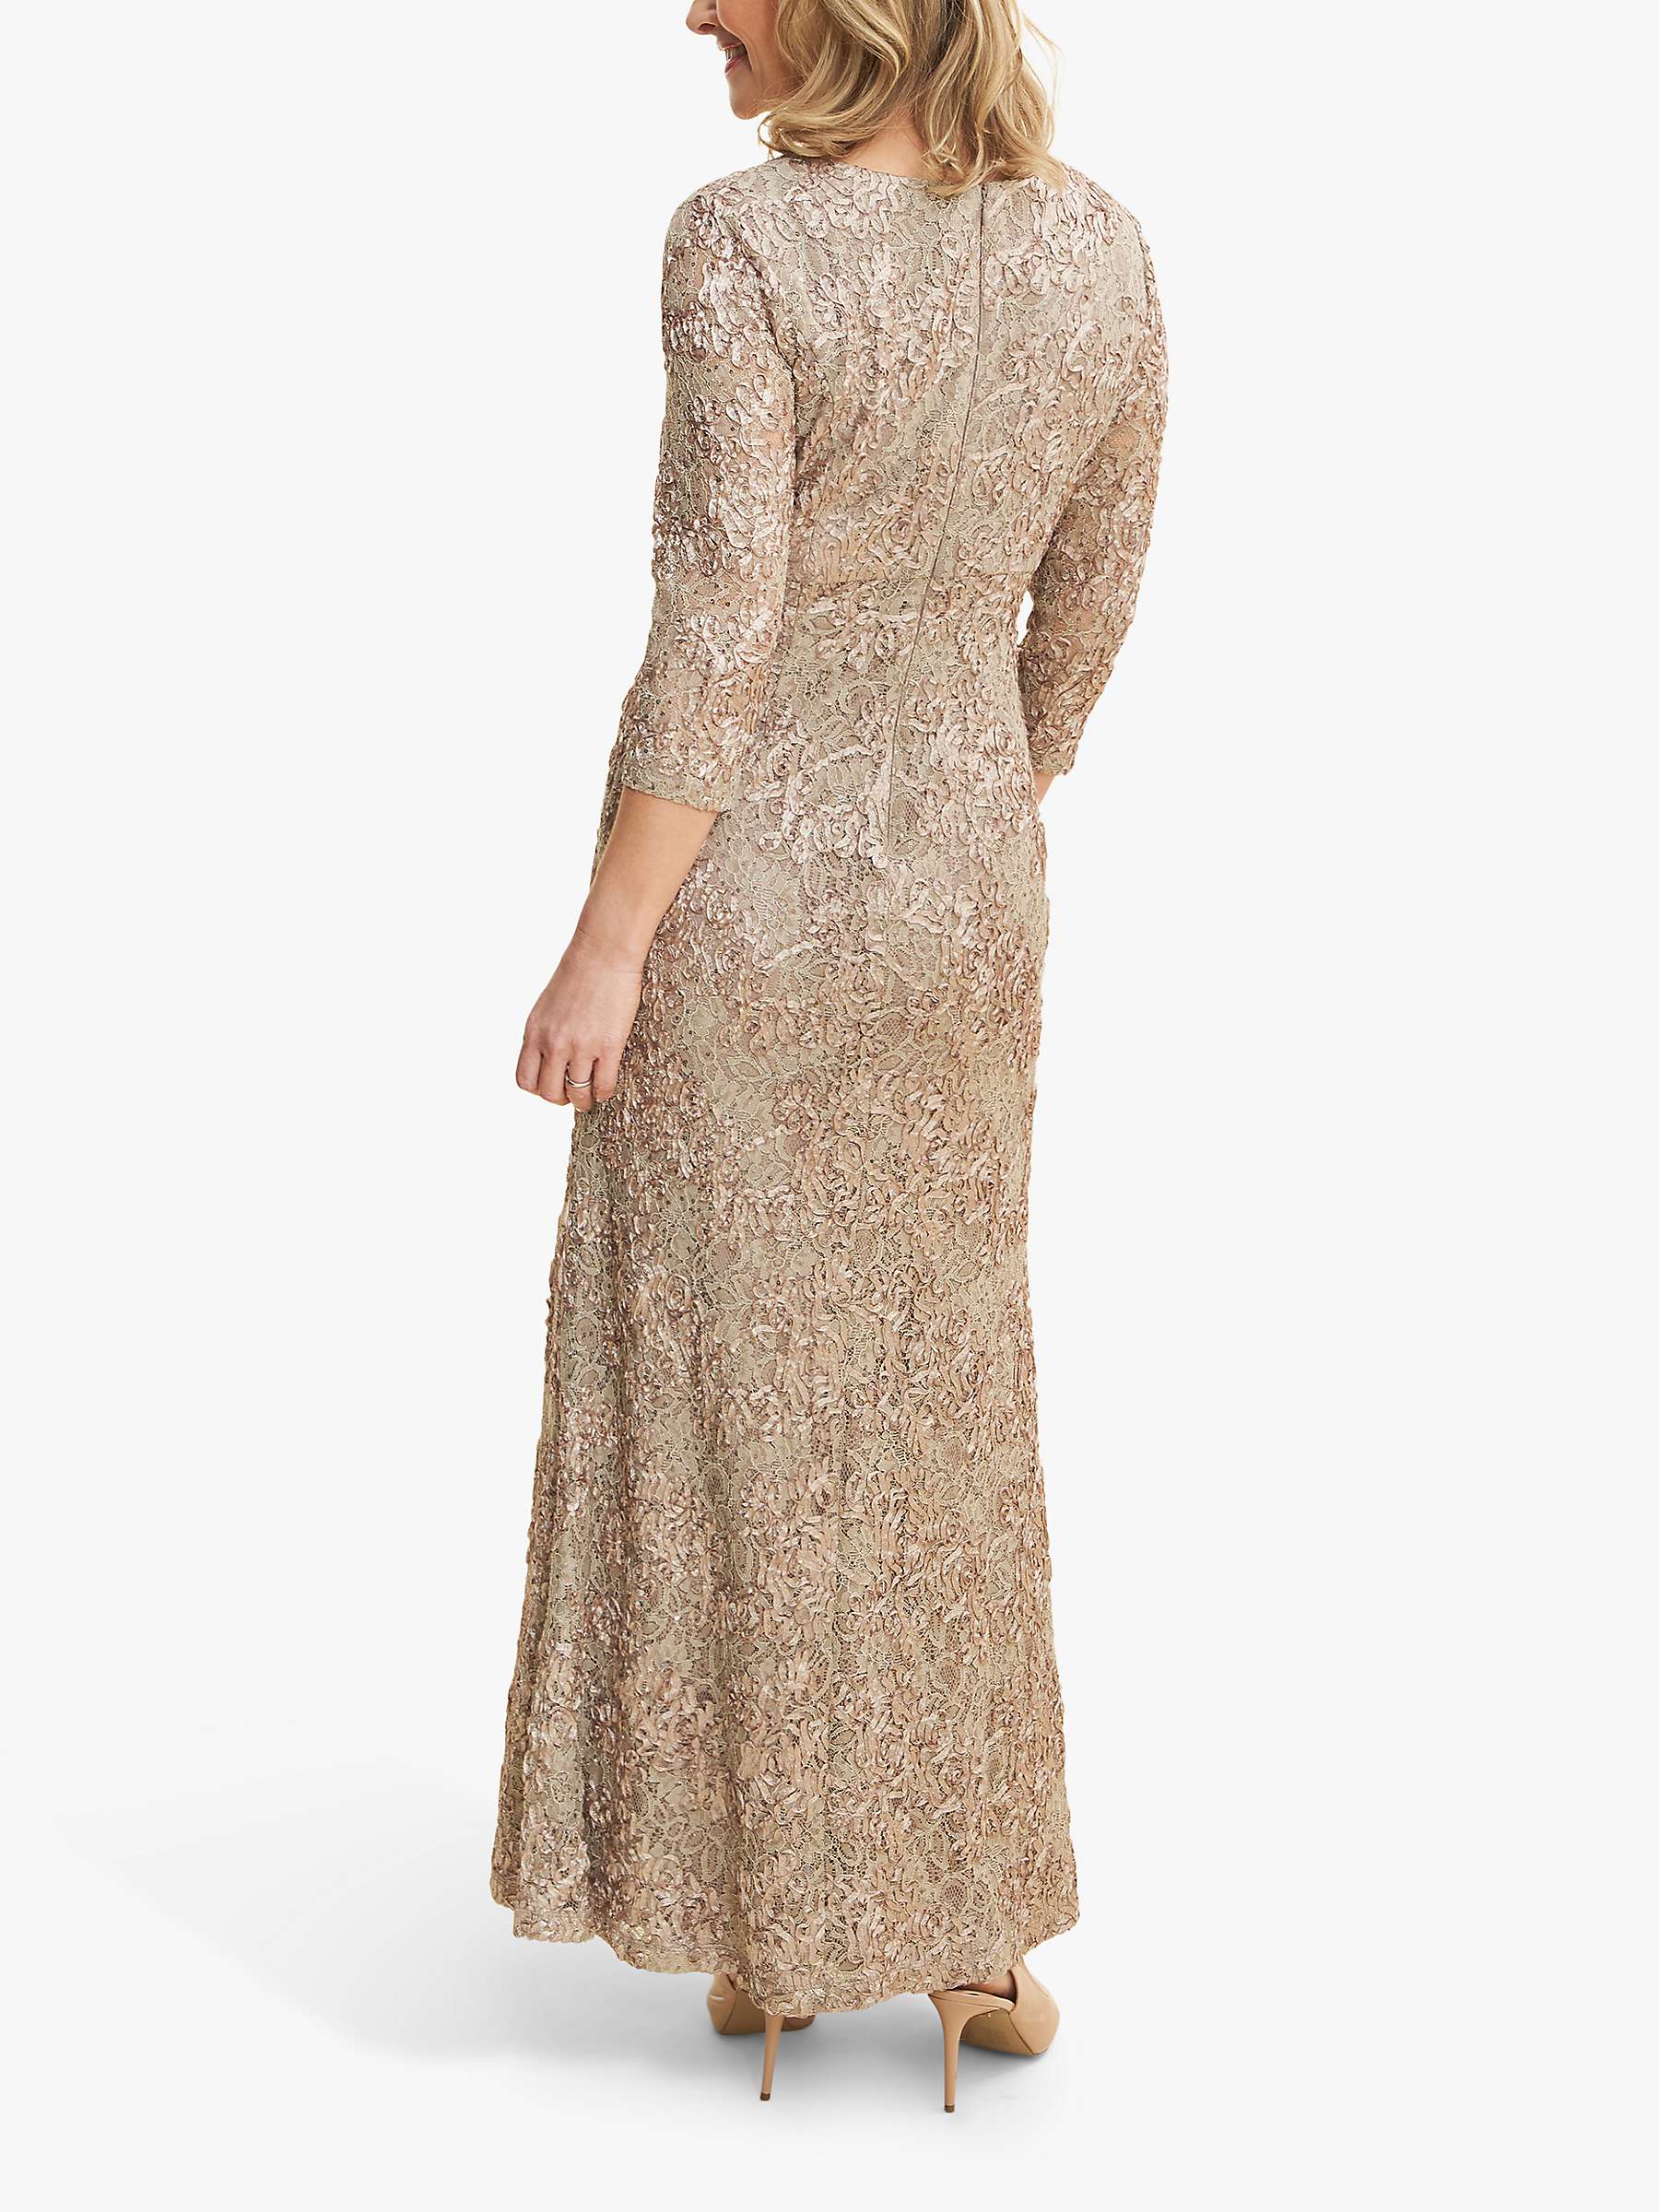 Buy Gina Bacconi Pauline Embroidered Lace Maxi Dress, Antique Gold Online at johnlewis.com